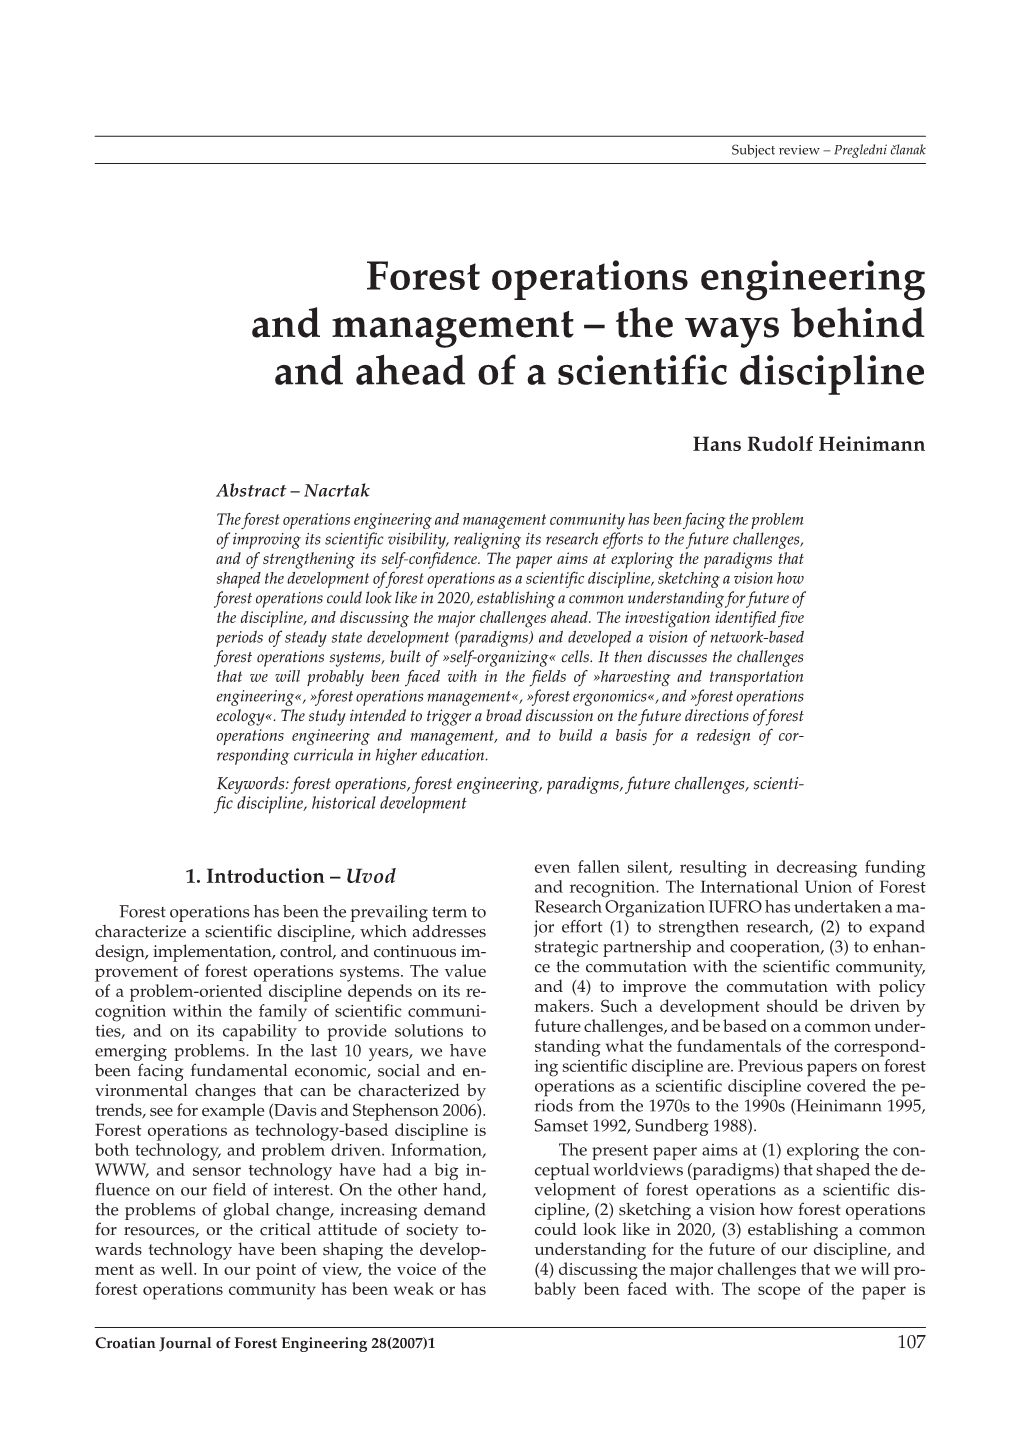 Forest Operations Engineering and Management – the Ways Behind and Ahead of a Scientific Discipline